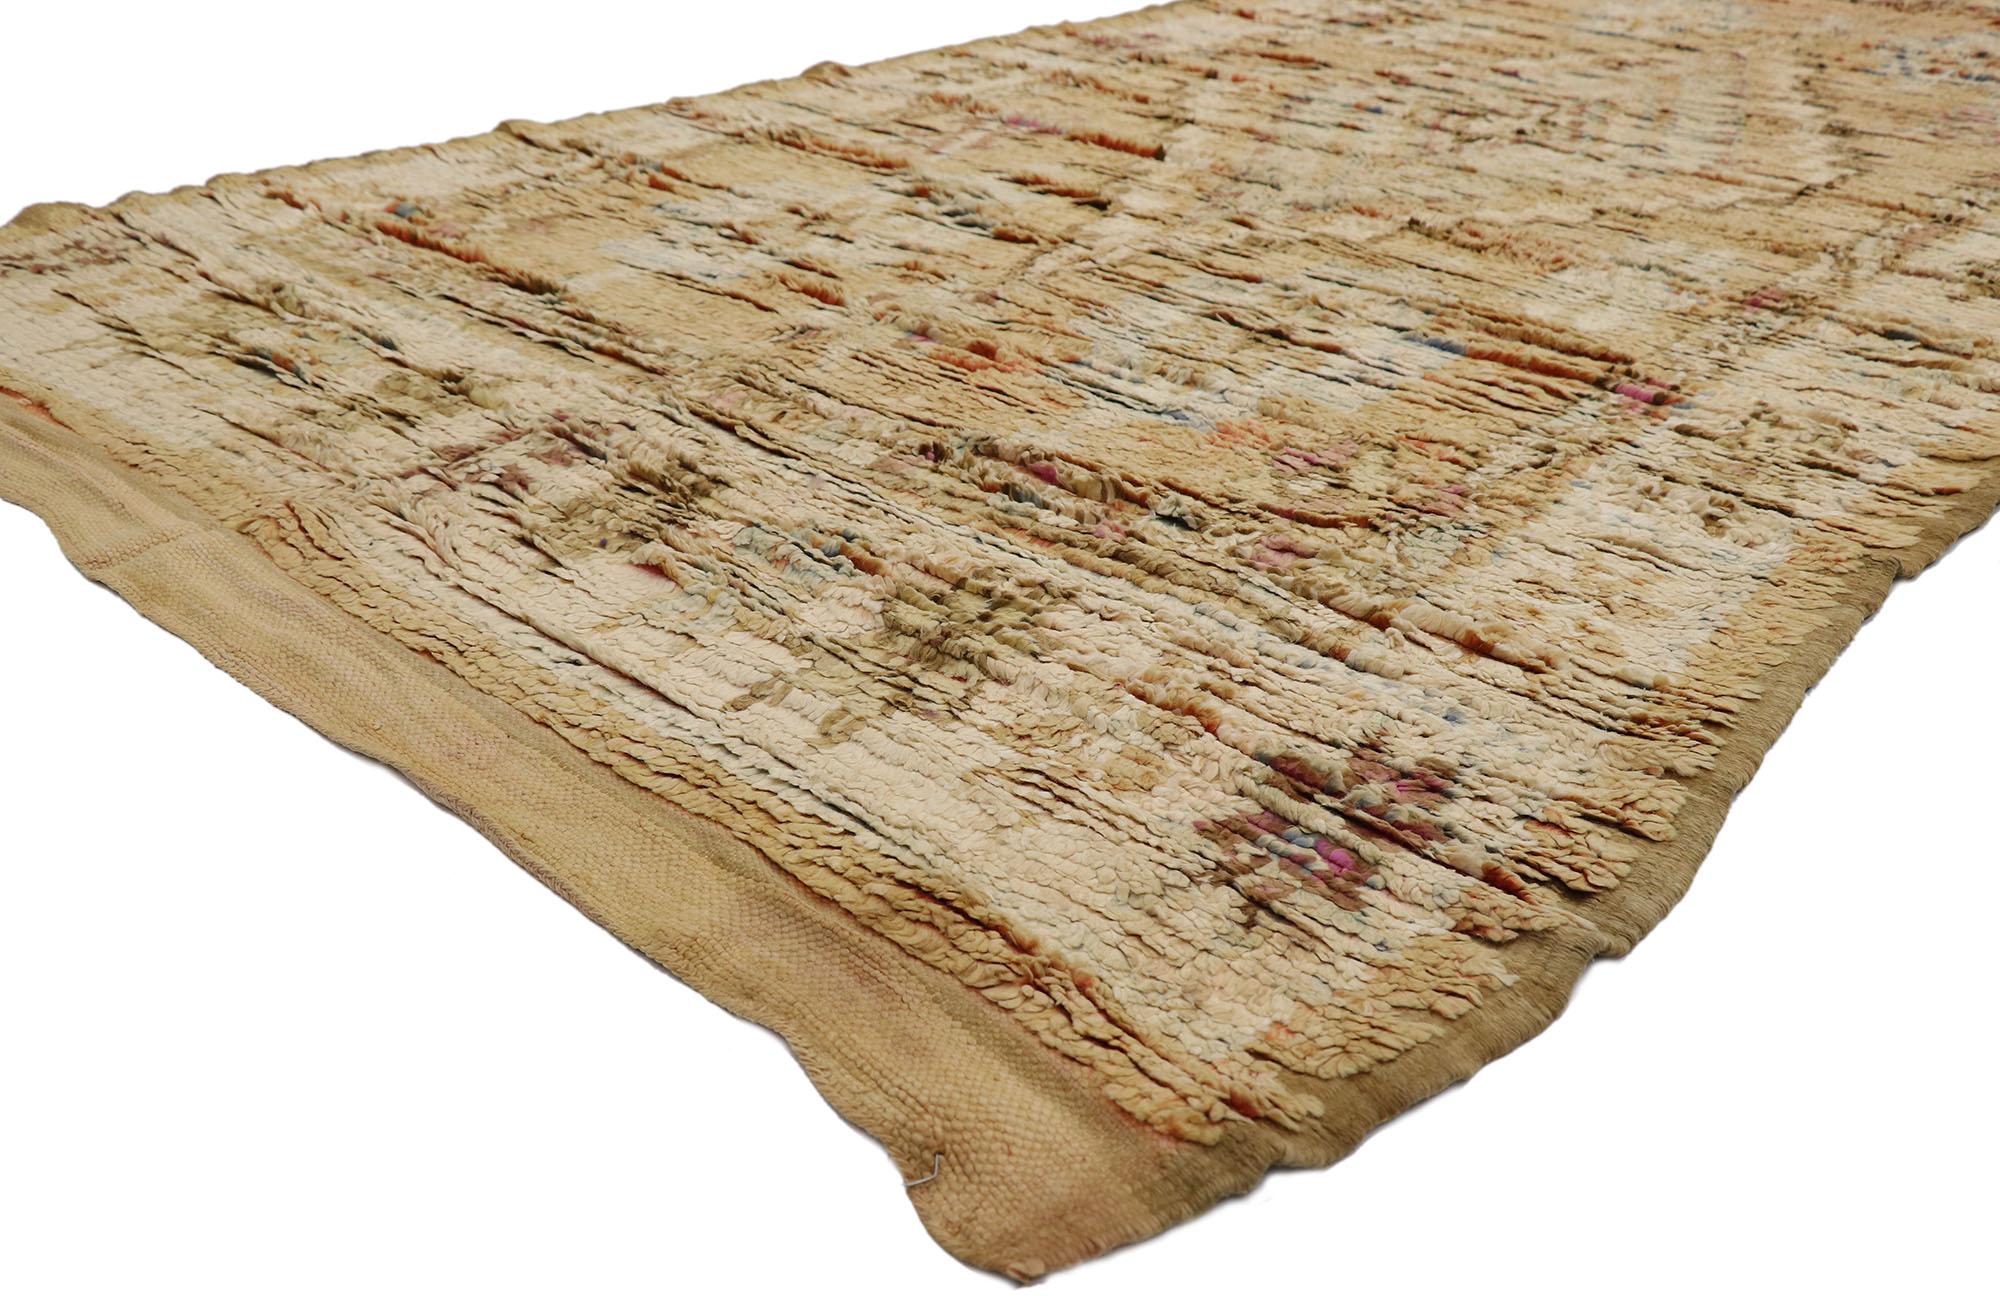 21481 Vintage Berber Boujad Moroccan rug with Tribal style and Hygge vibes. Measures: 05'11 x 11'00. With its neutral hues, plush pile and tribal style, this hand knotted wool vintage Berber Boujad Moroccan rug provides a feeling of cozy contentment